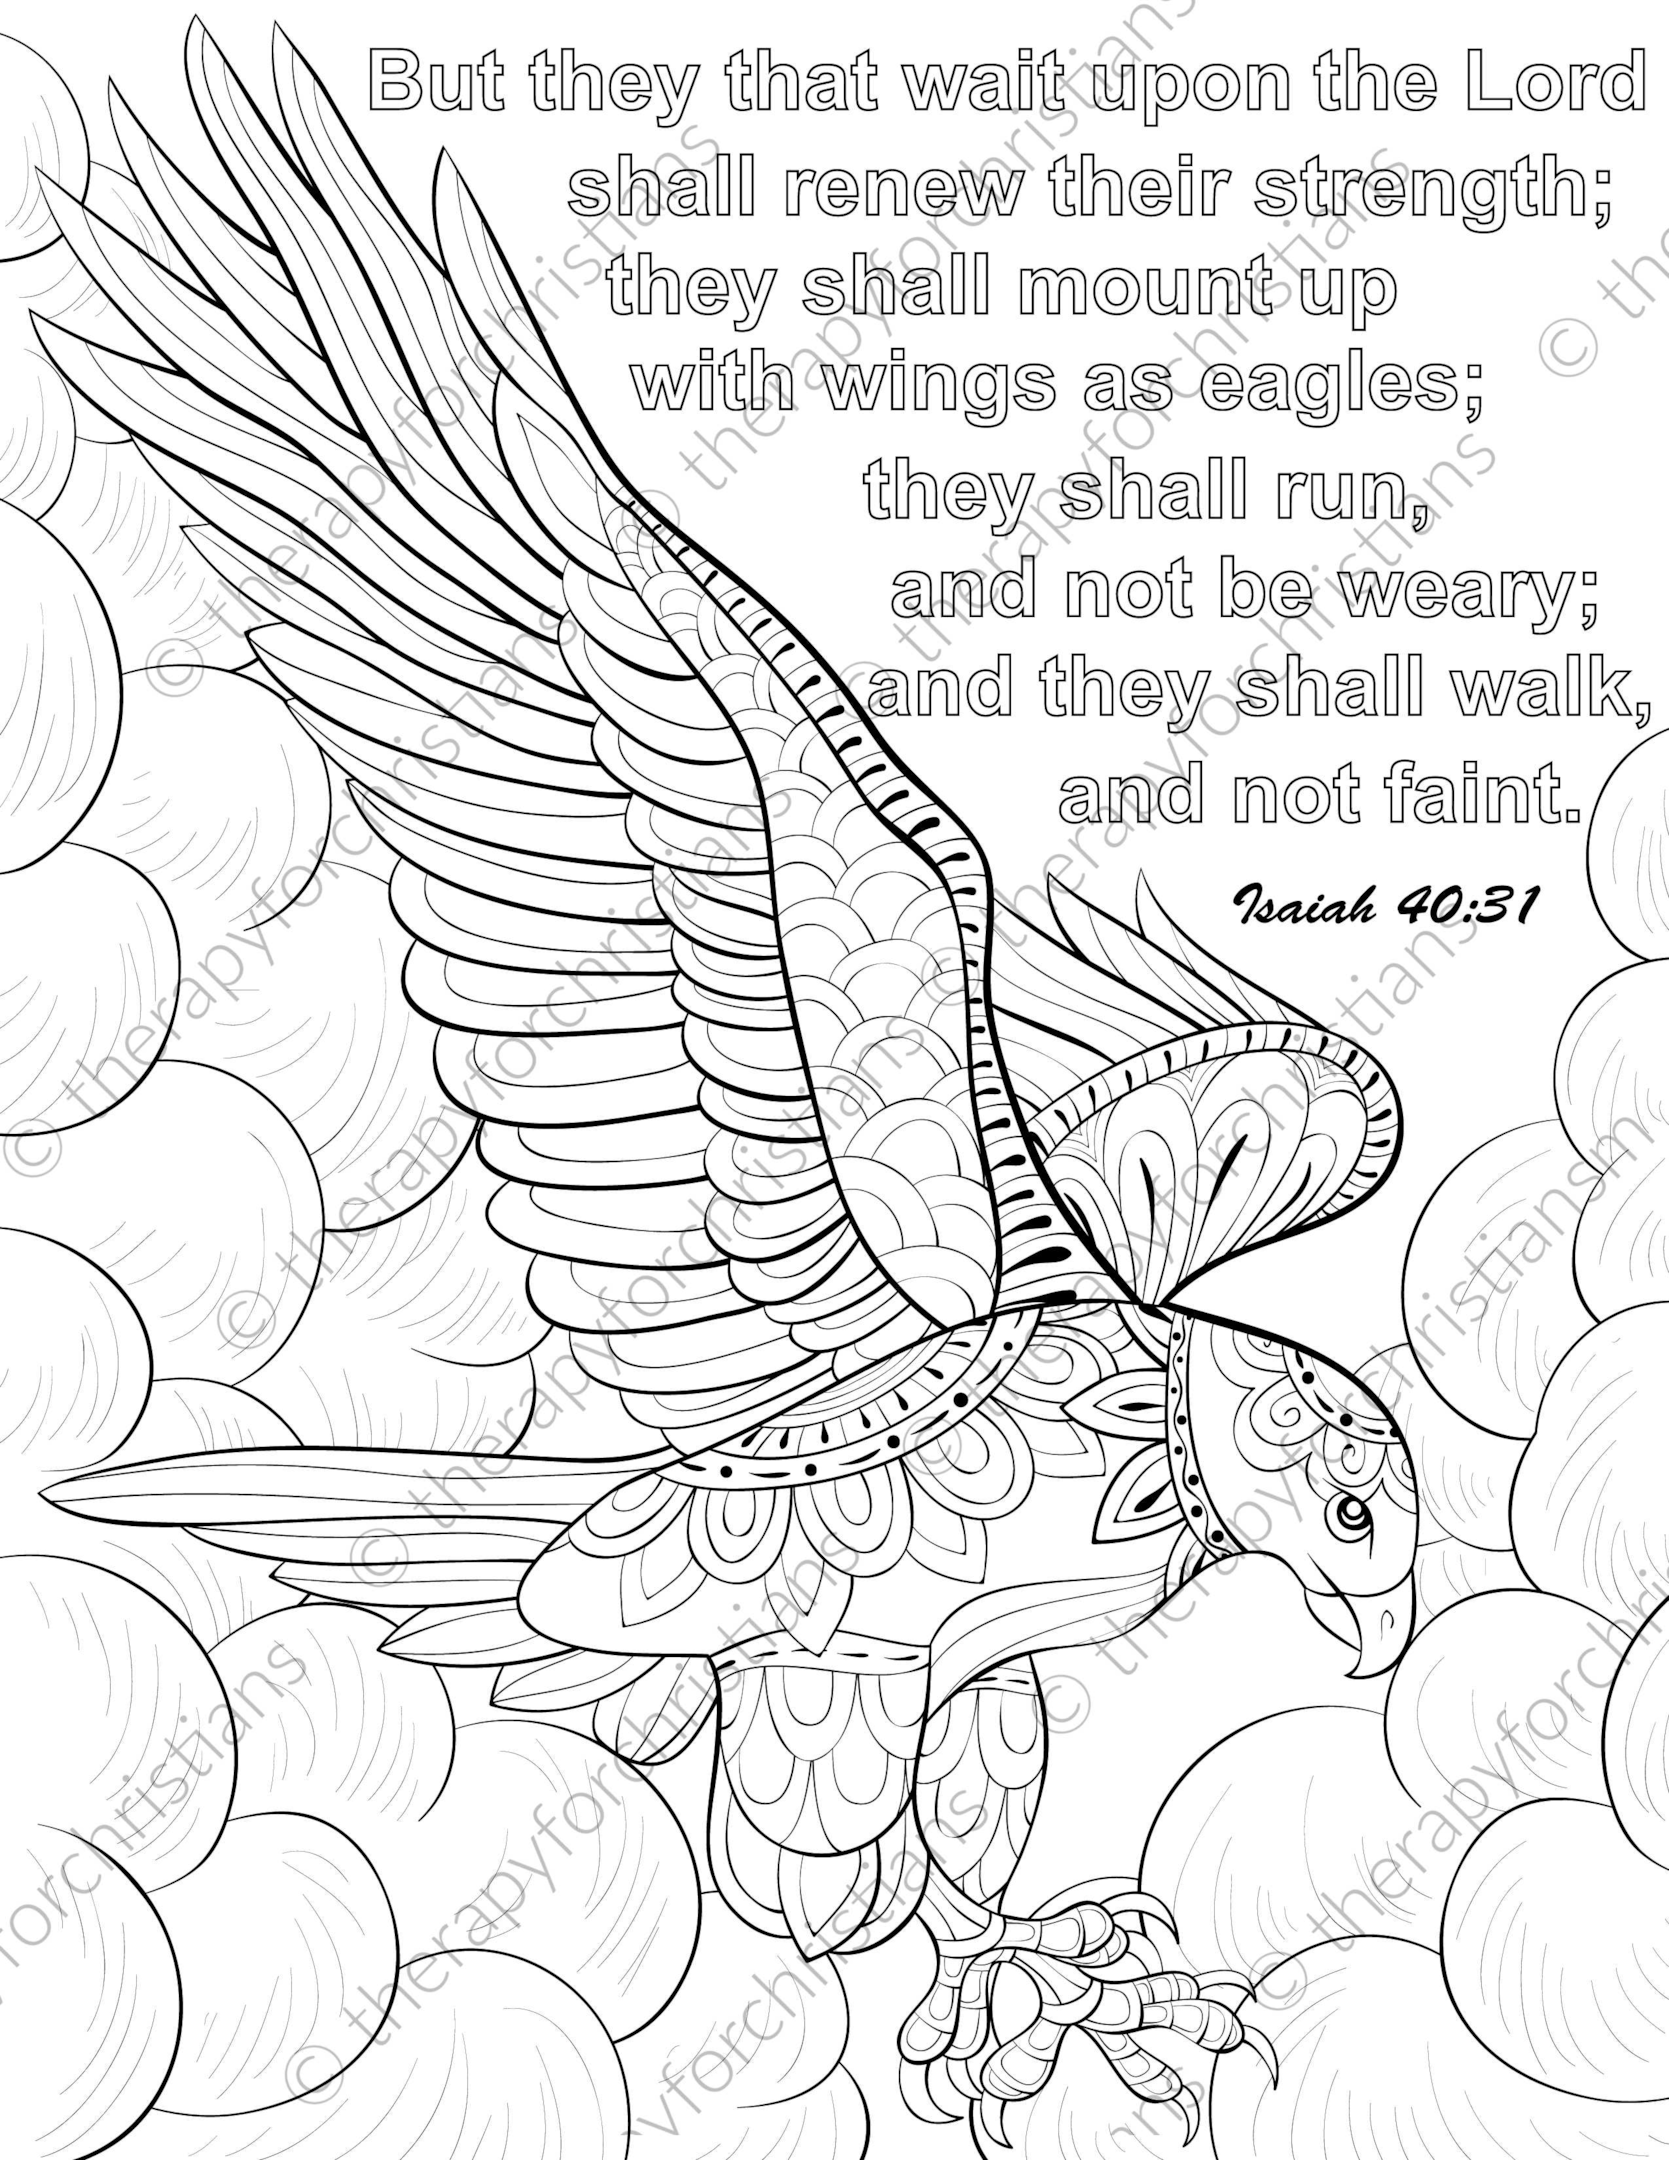 Isaiah 40:31 Bible verse coloring pages